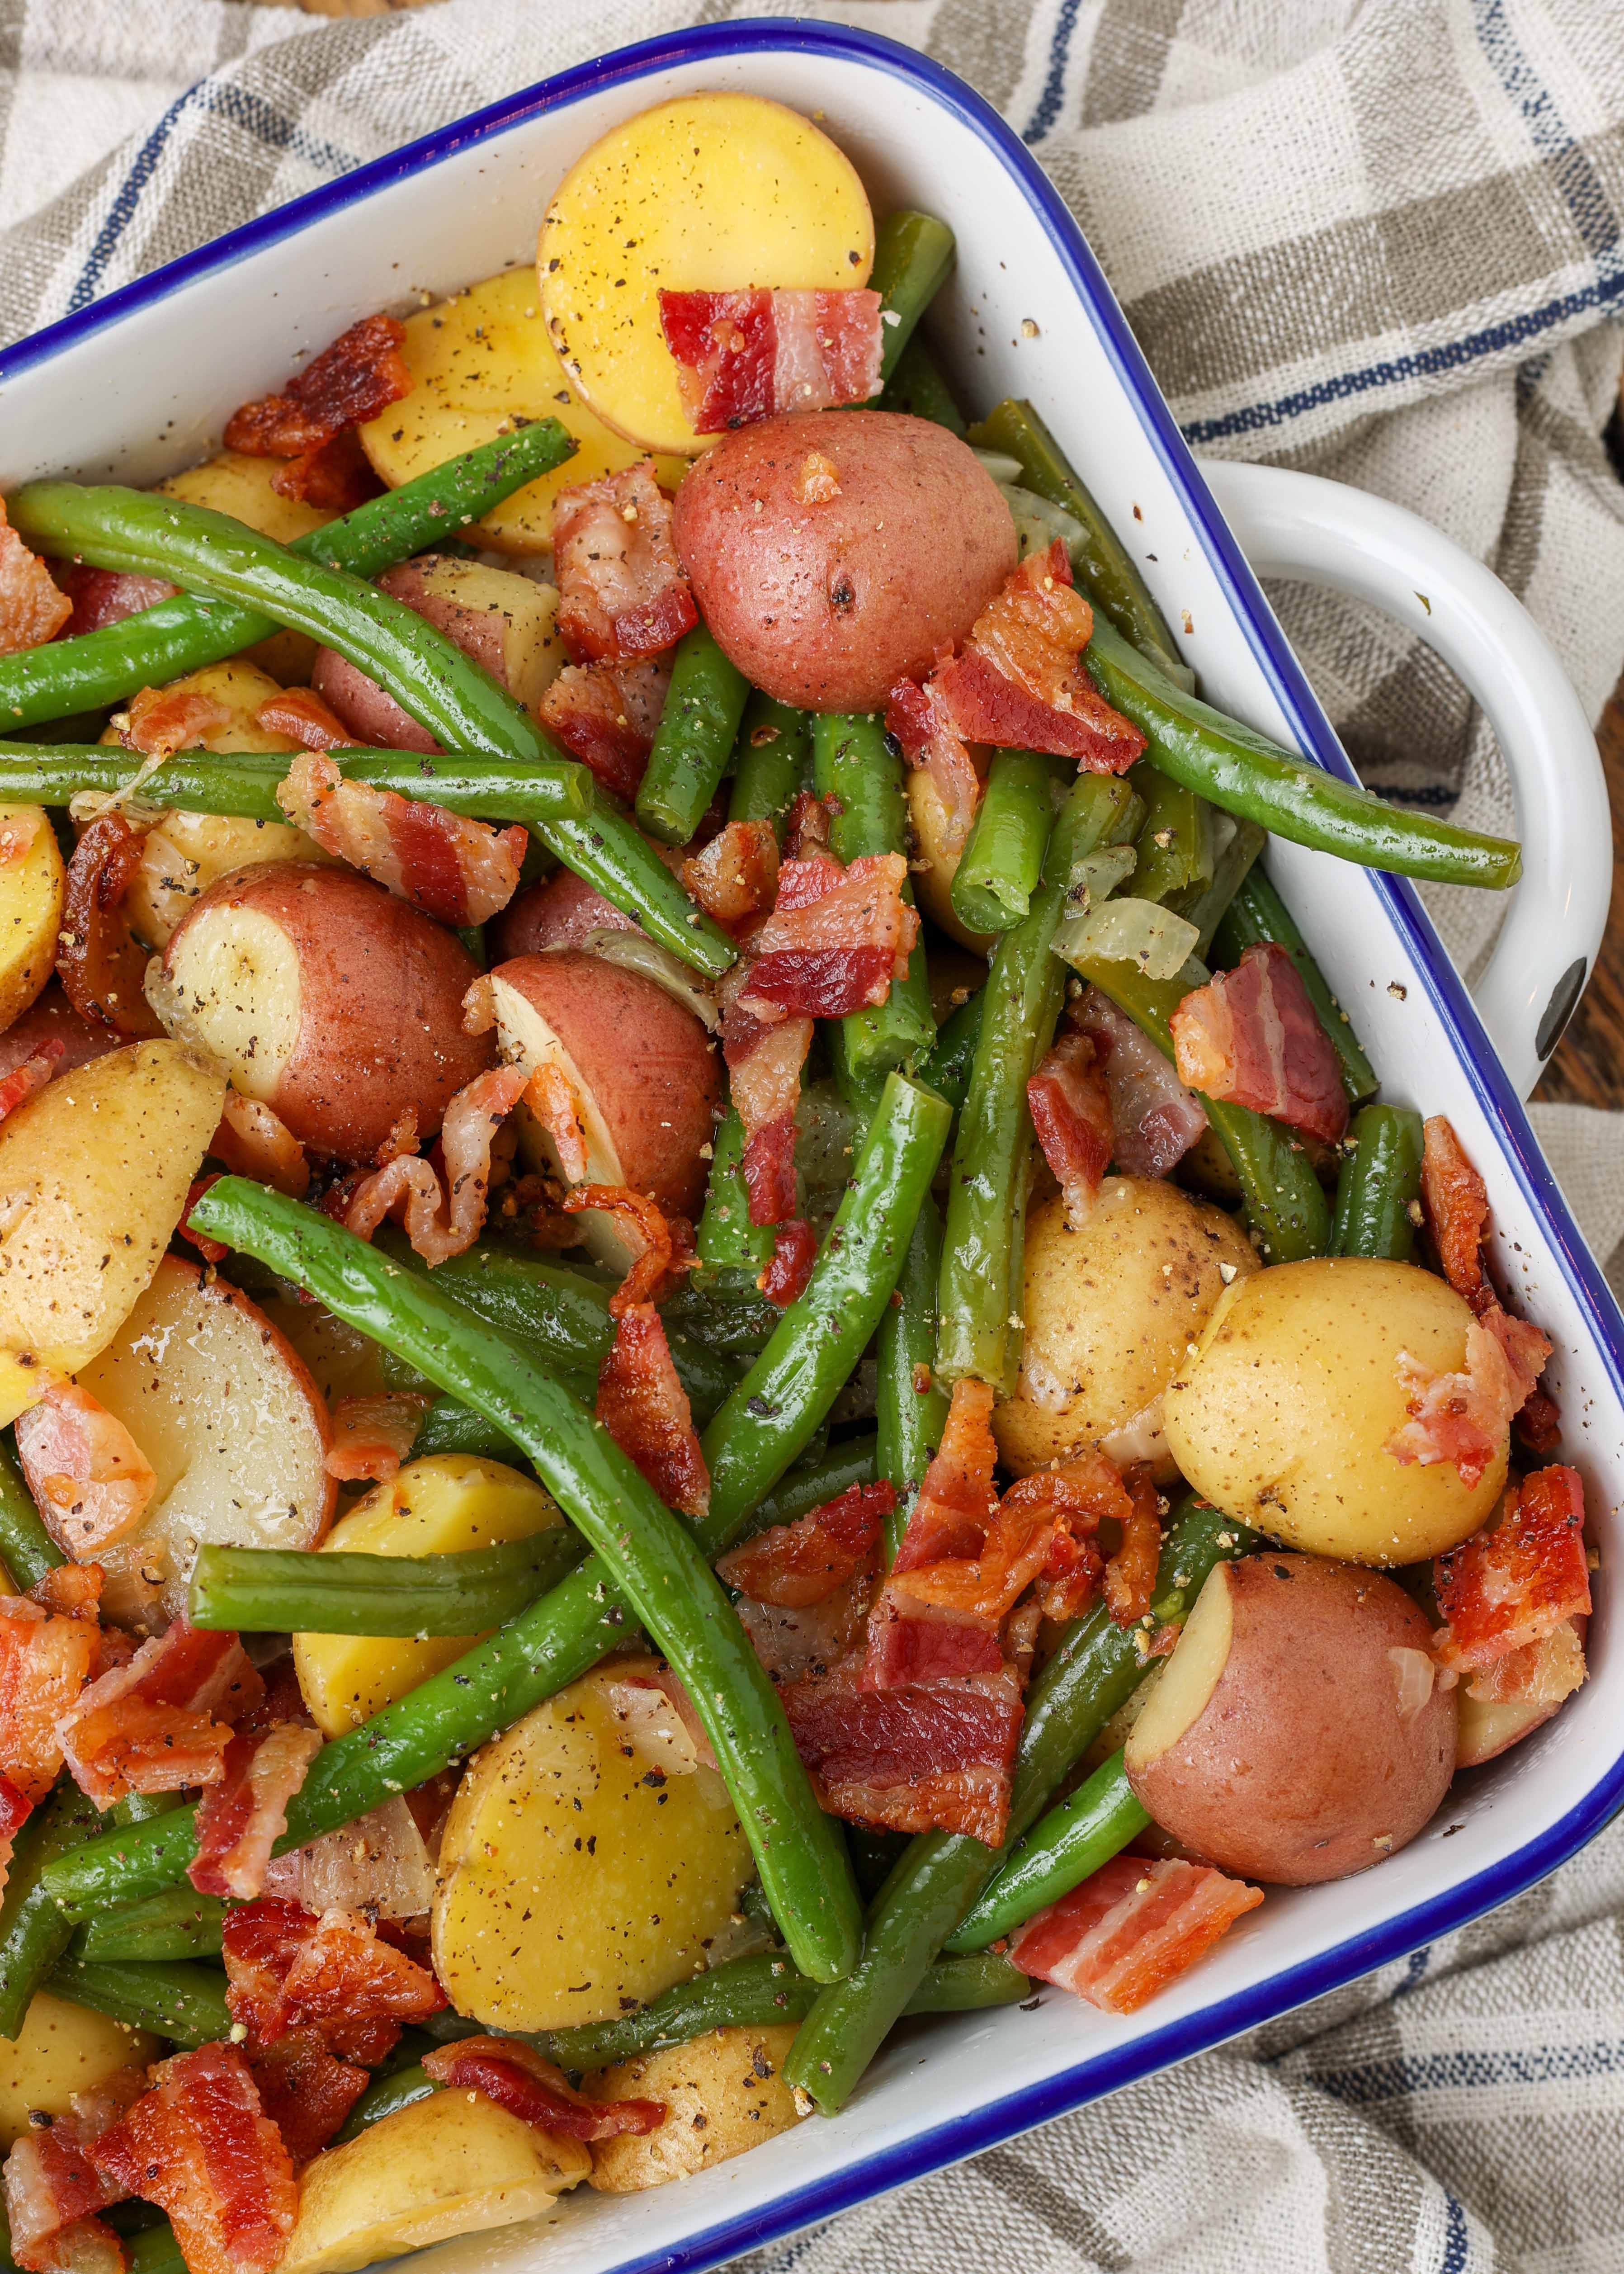 https://barefeetinthekitchen.com/wp-content/uploads/2022/09/Southern-Green-Beans-with-Potatoes-BFK-8-1-of-1.jpg